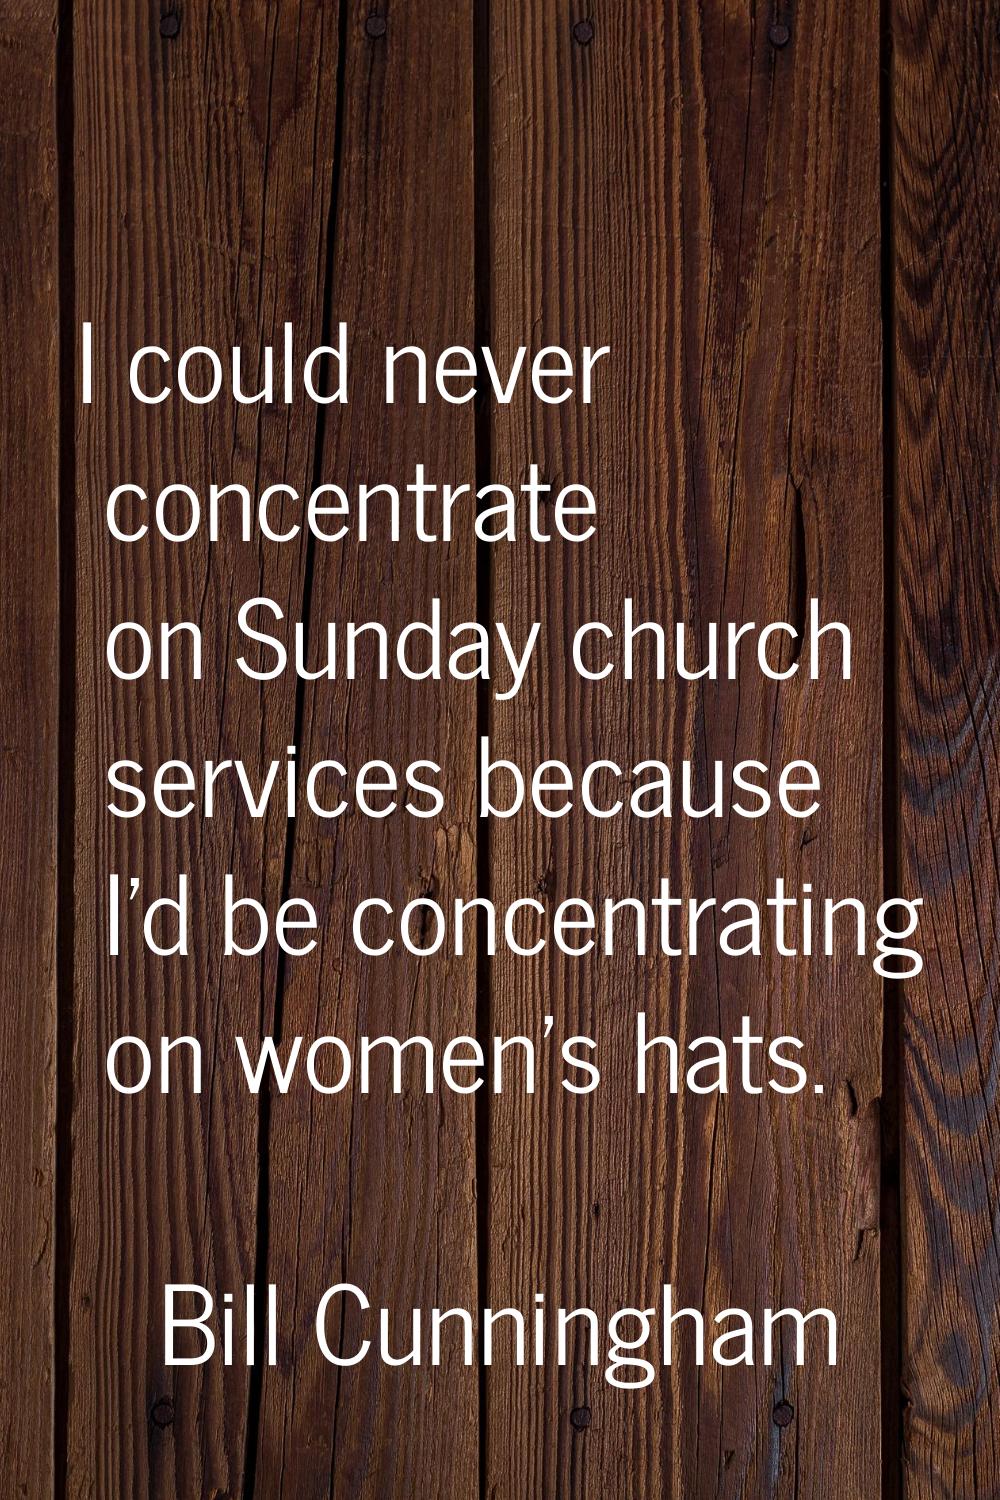 I could never concentrate on Sunday church services because I'd be concentrating on women's hats.